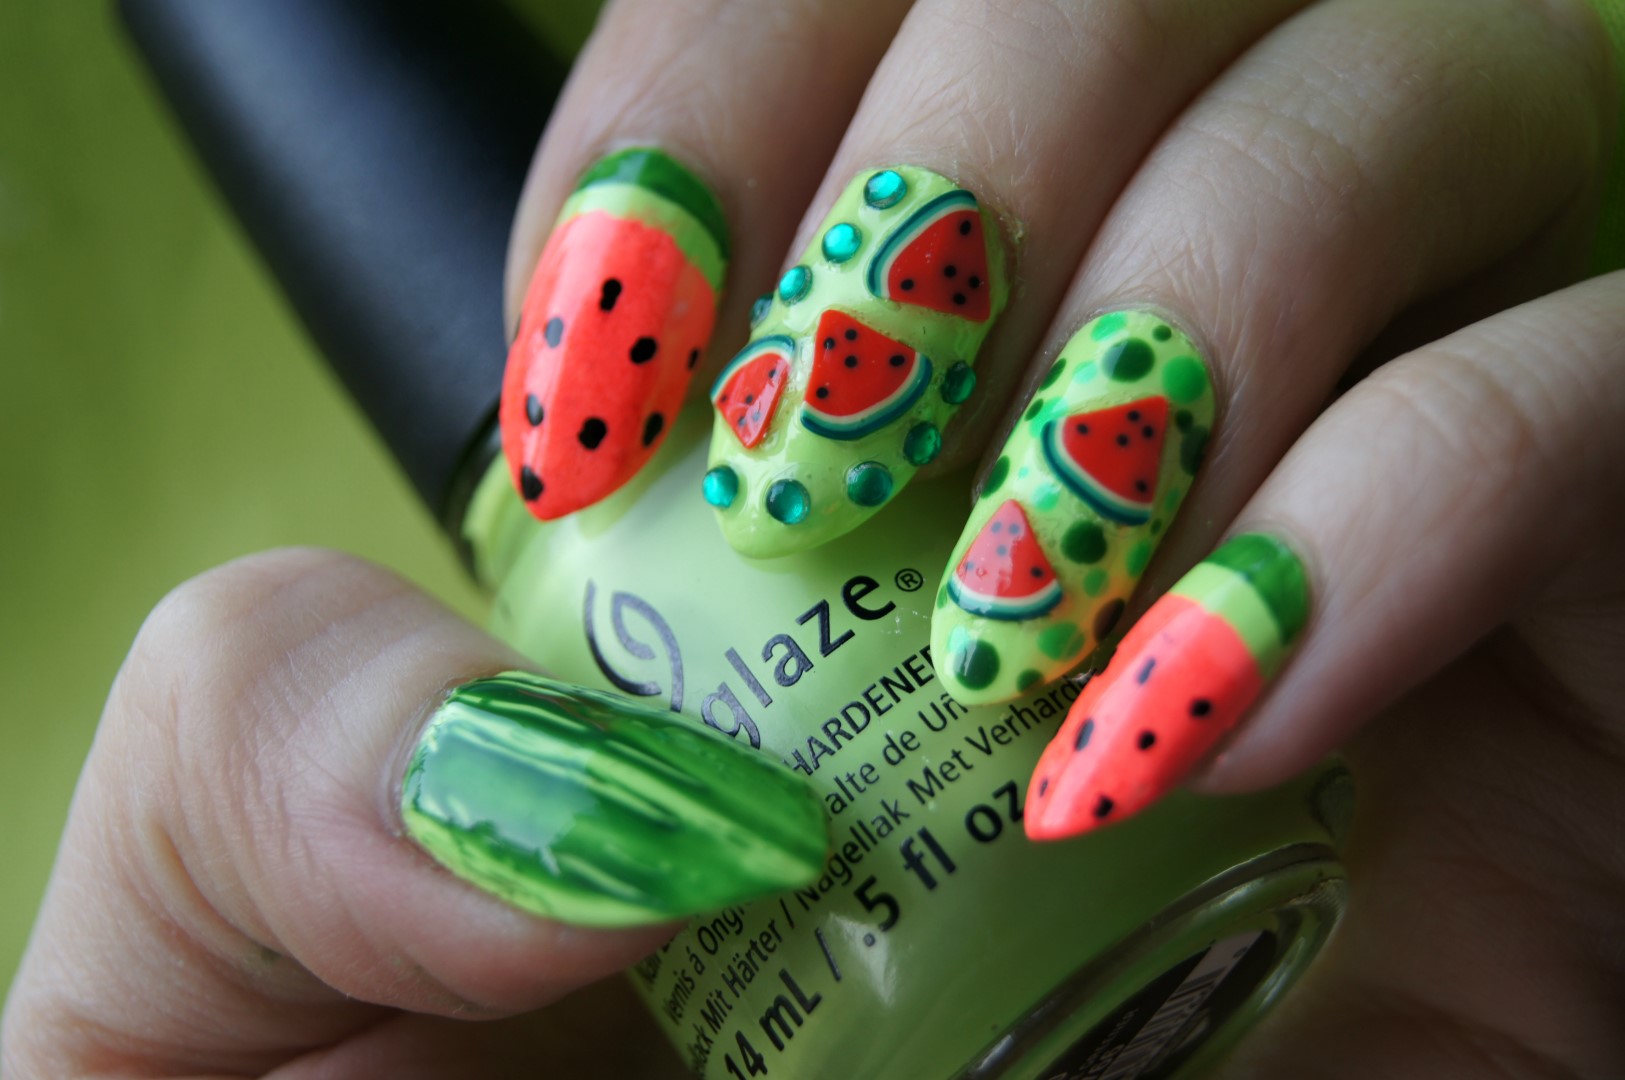 Watermelon Nail Art Designs for Short Nails - wide 2